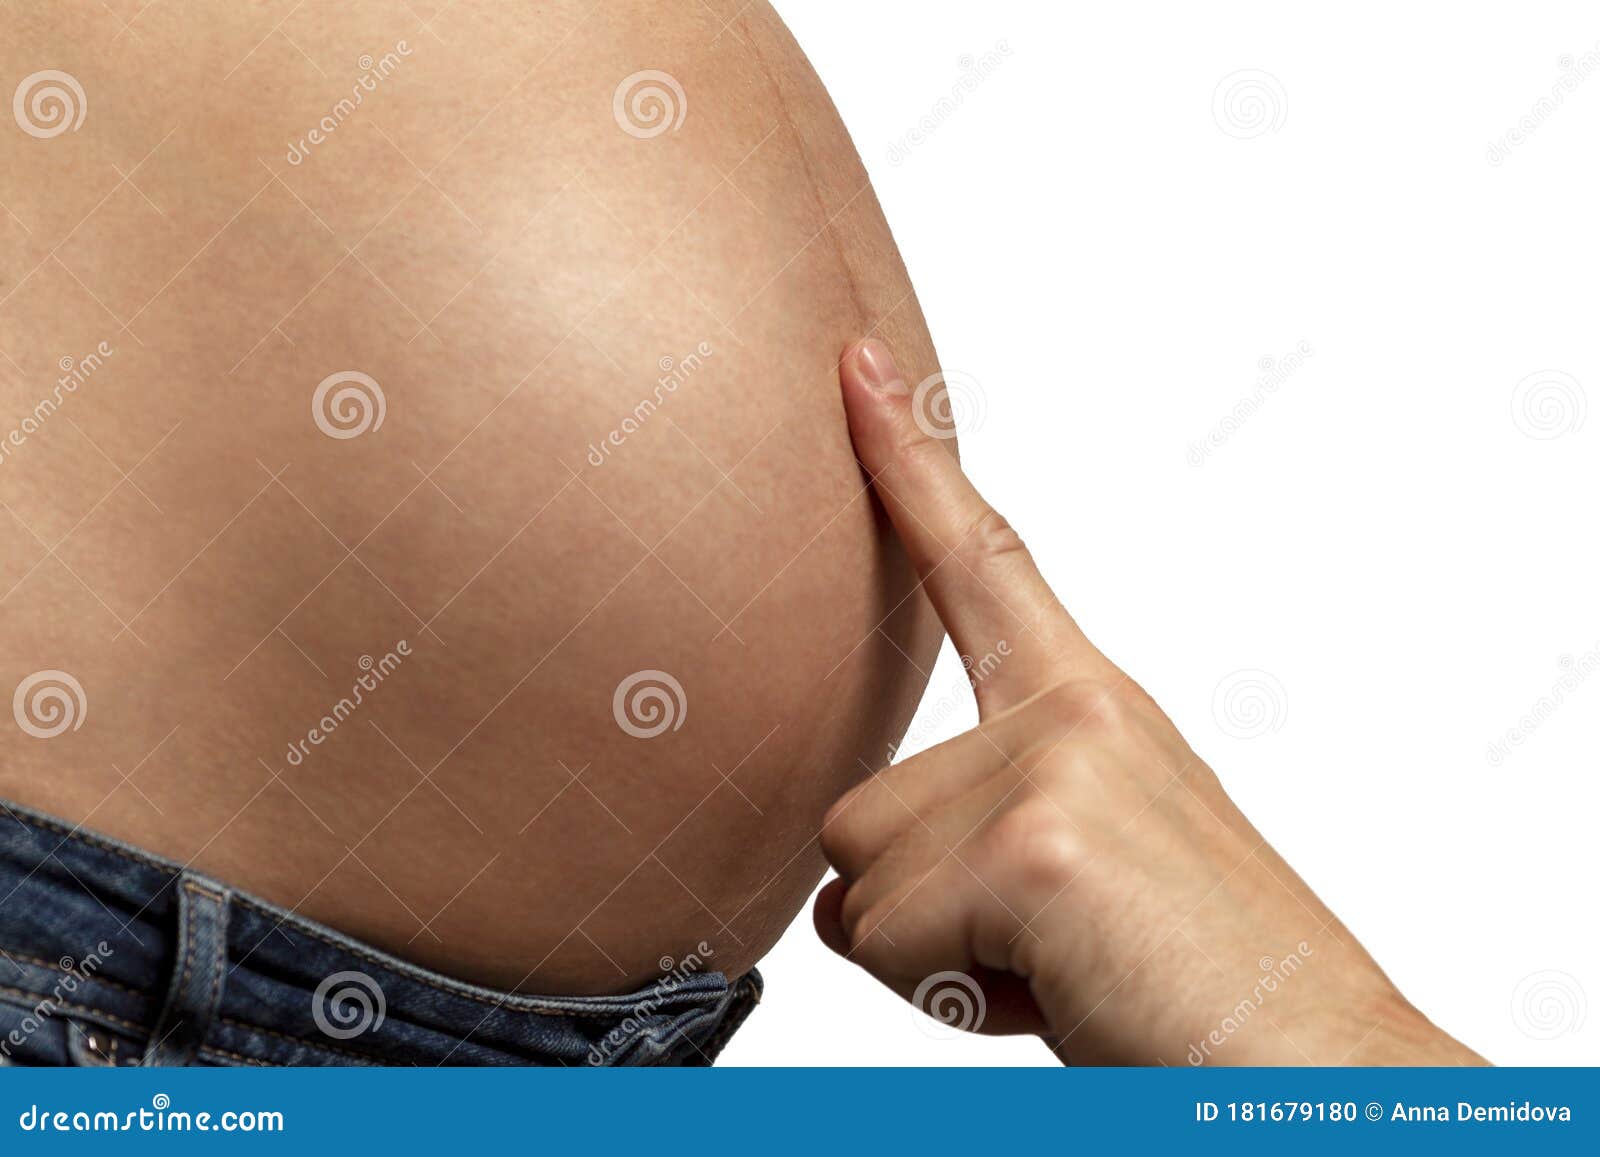 Index Finger on the Belly Button of a Pregnant Womanâ€™s Large Belly.  Expectation of Motherhood. Isolated on a White Background Stock Photo -  Image of life, feminine: 181679180